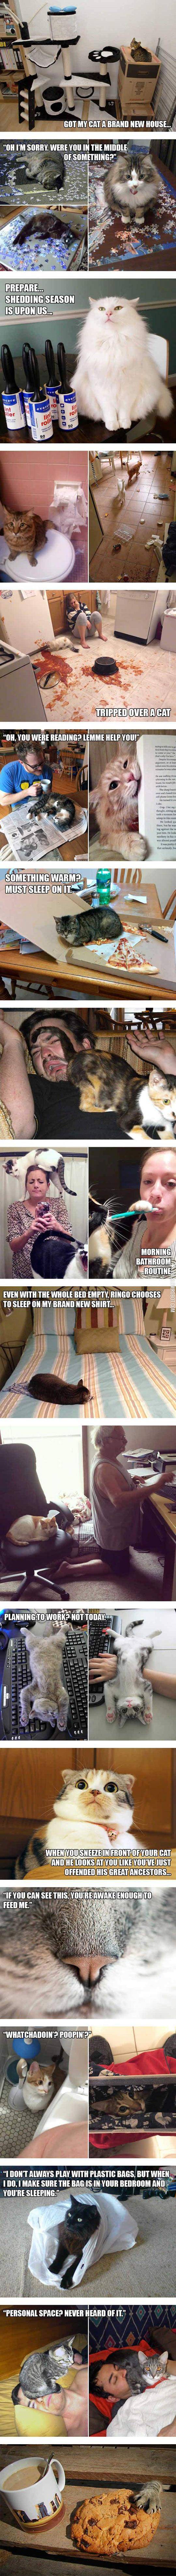 Hilarious+Struggles+Only+Cat+Owners+Will+Understand